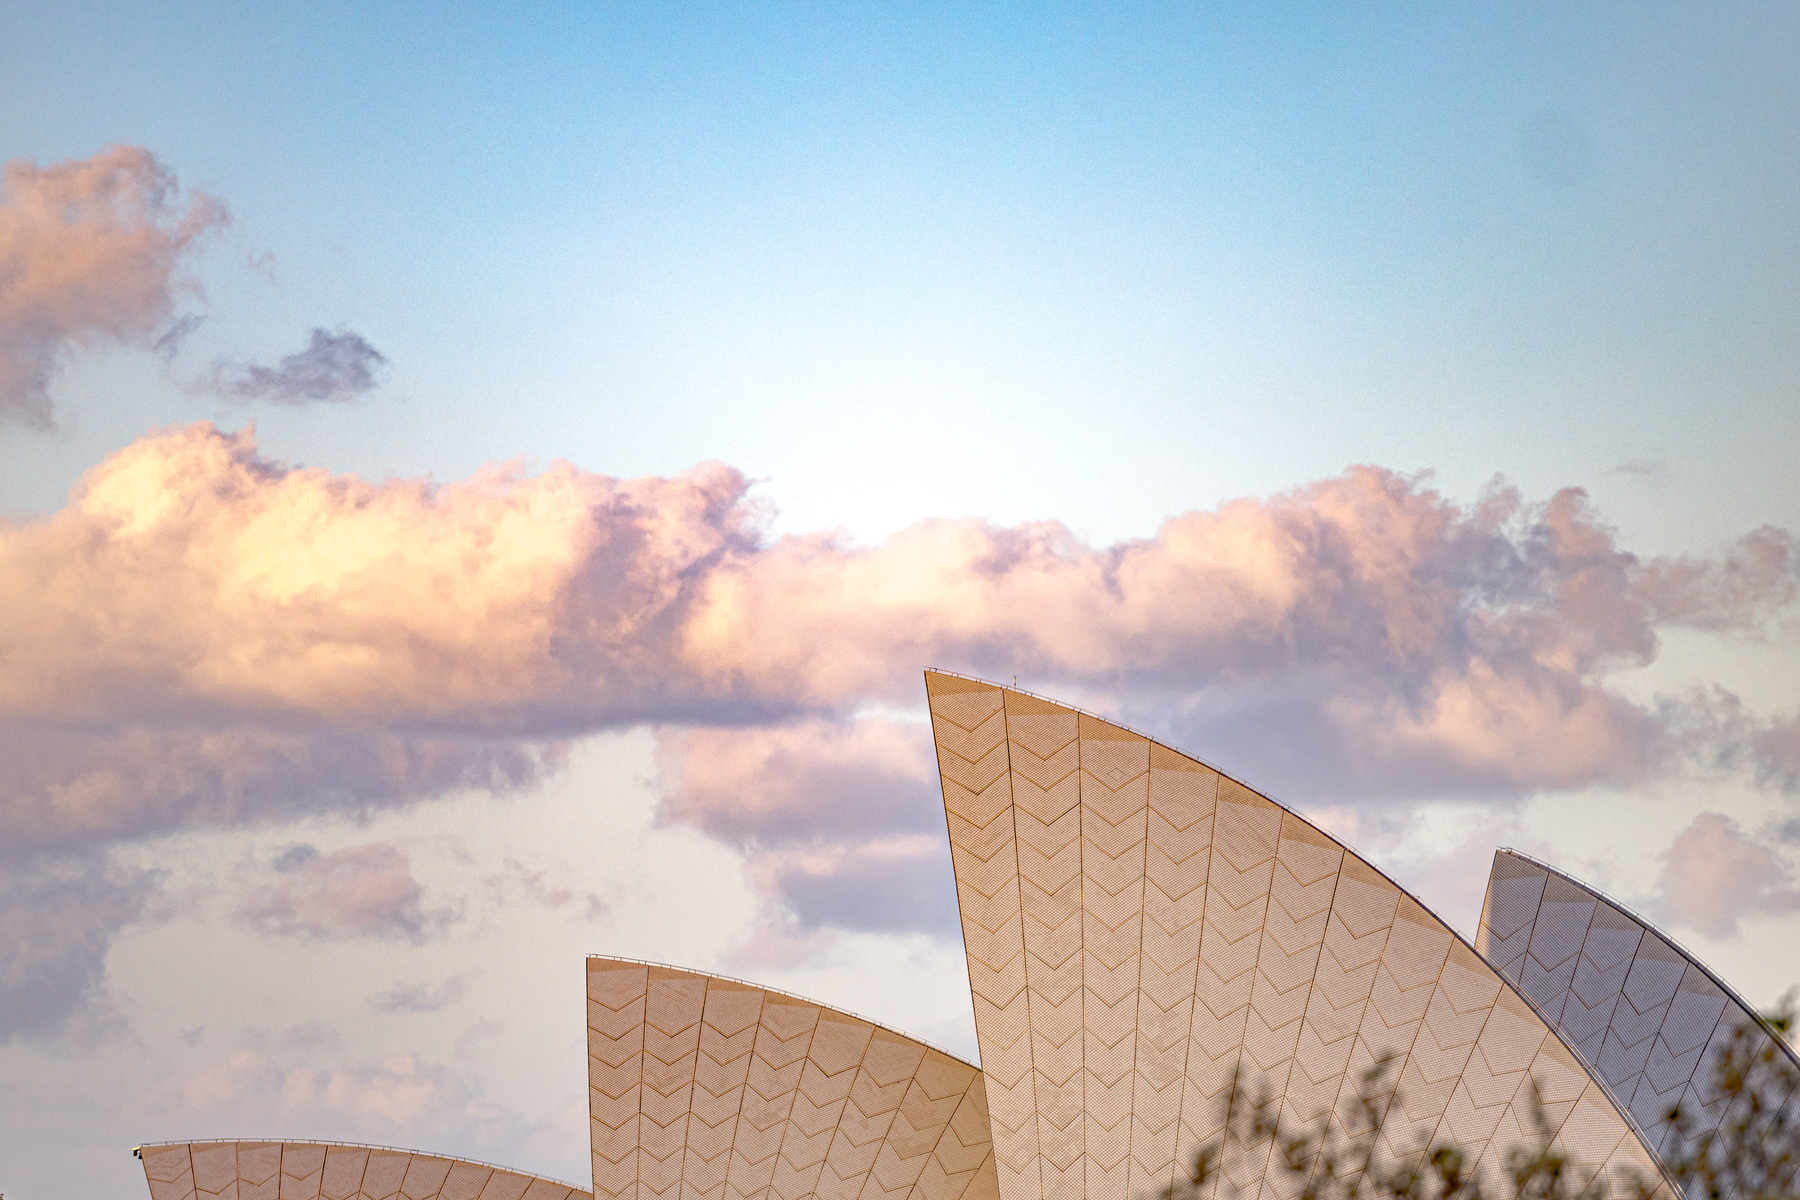 Sydney Opera House photographed by Josh Withers